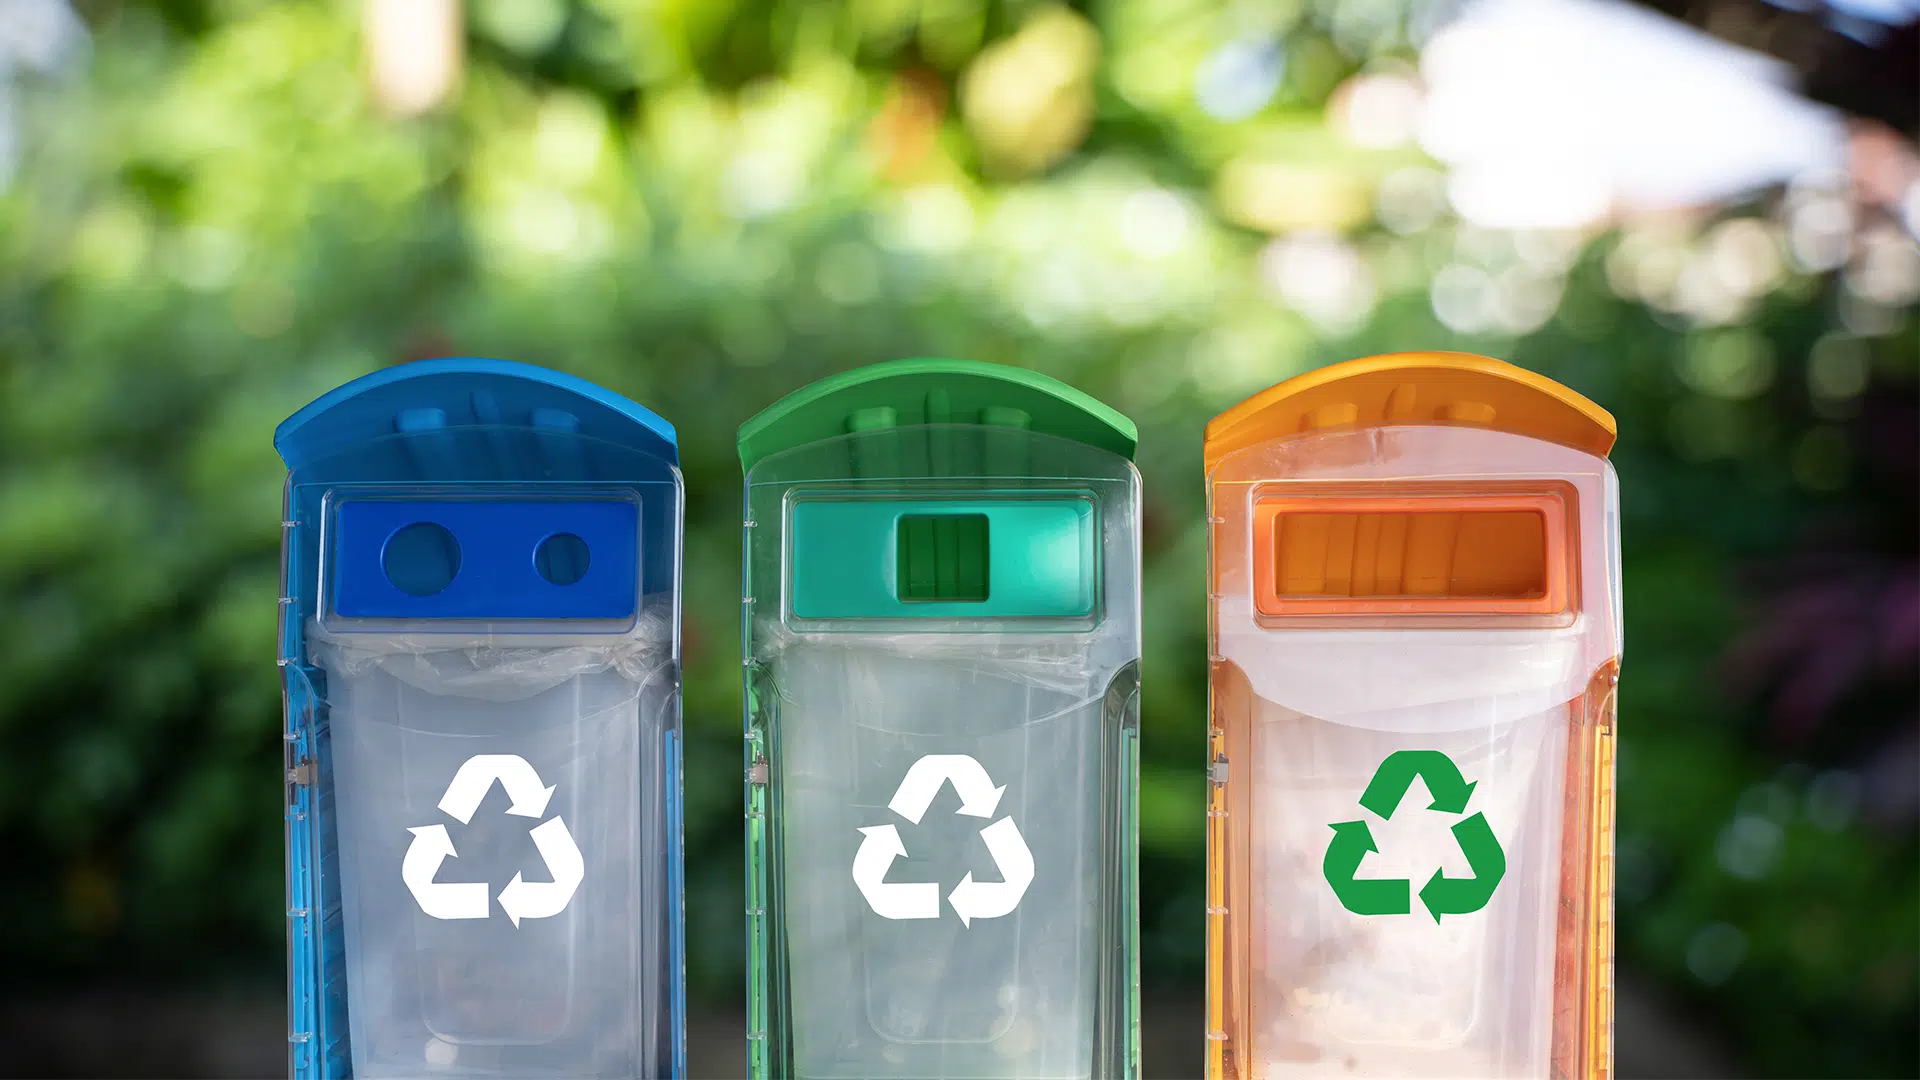 Reduce, Reuse, and Recycle Tips for Kids